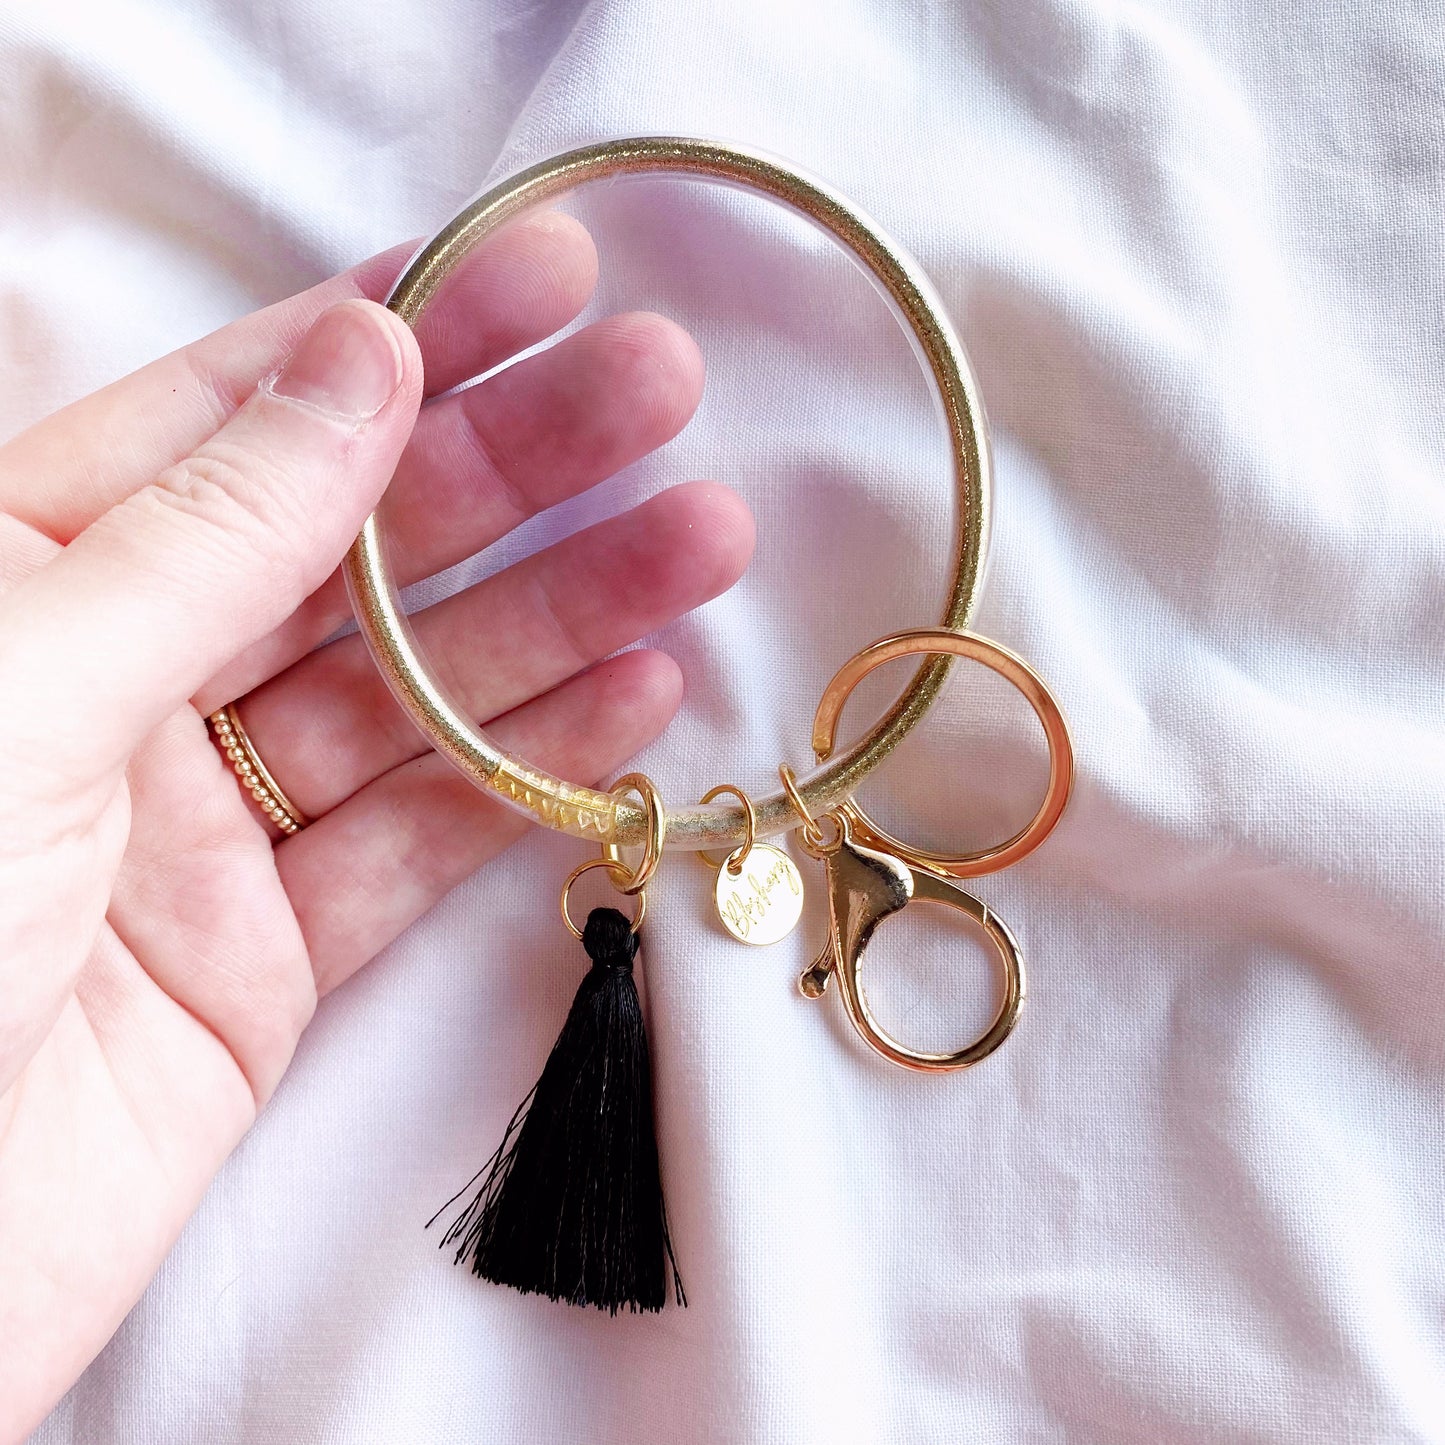 gold and black jelly bangle bracelet and keychain